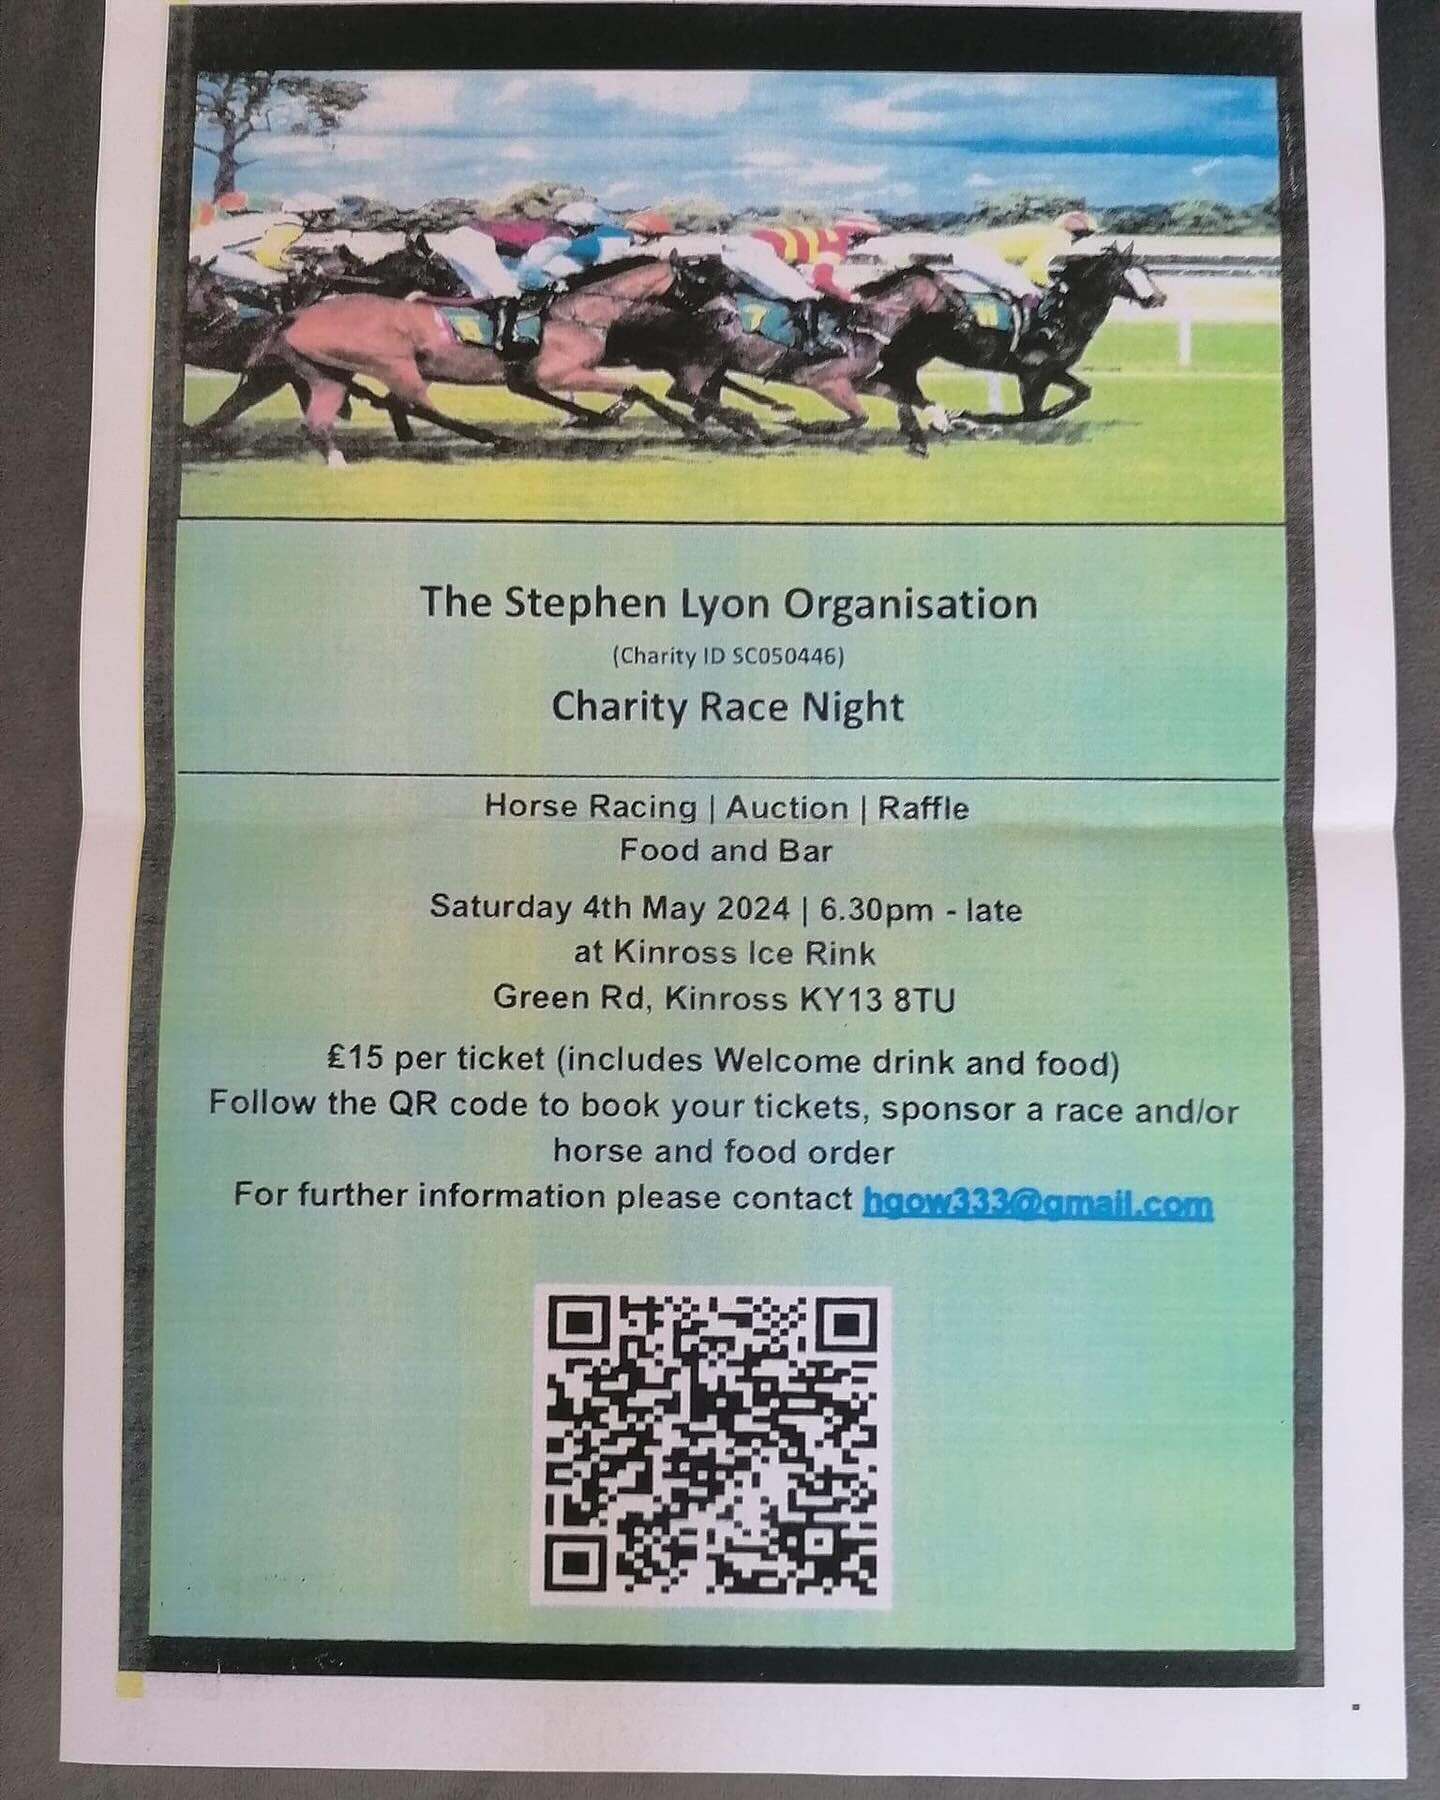 Join us for a night of fun, food and races. We are pleased to have Harry Gow host the night for us at the Kinross Ice Rink on the 4th May 2024. Tickets are limited, so don&rsquo;t miss out and get yours NOW.
Tickets are &pound;15 and you can name a h